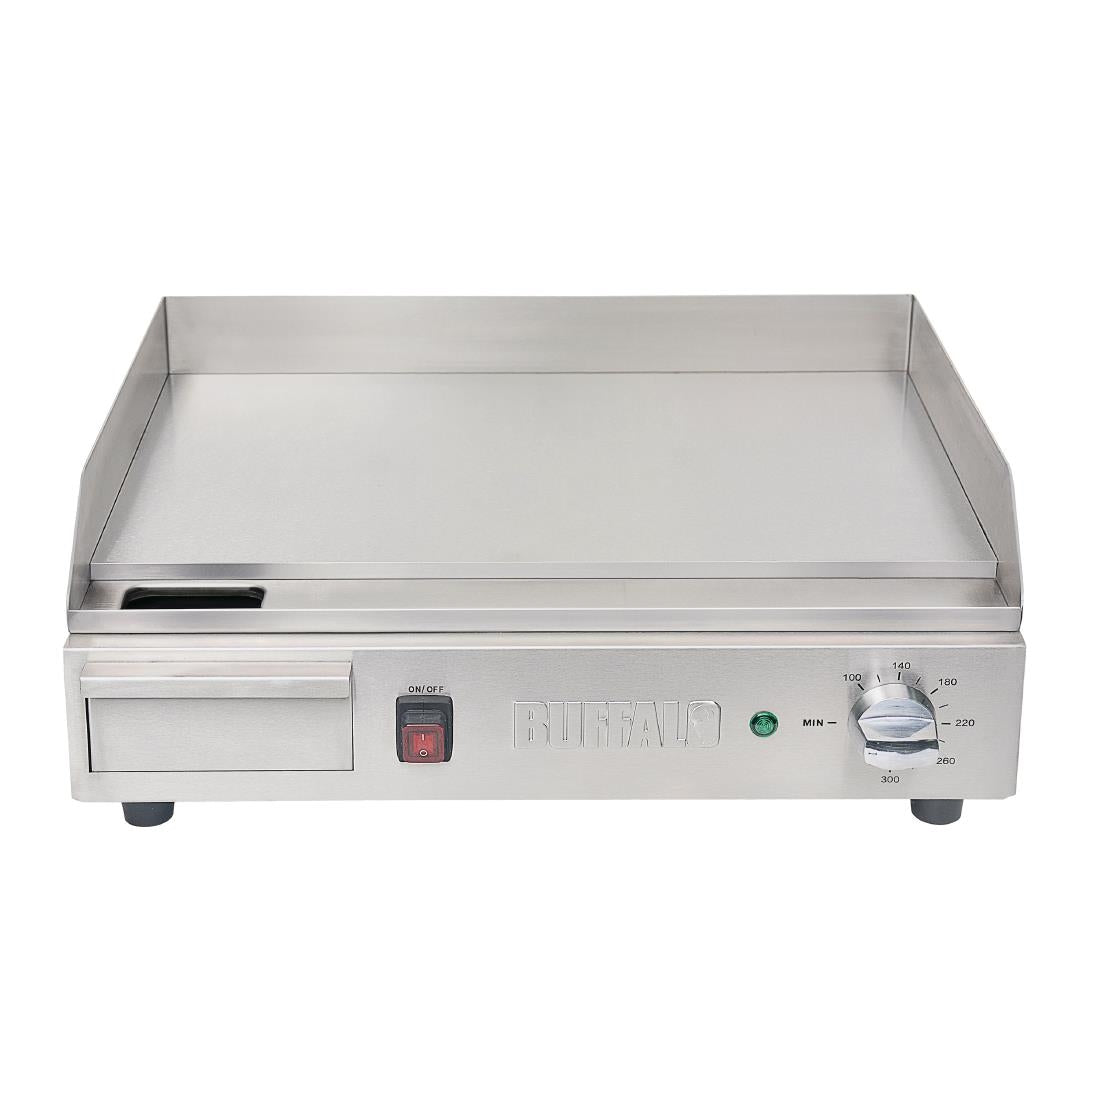 DB193 Buffalo Steel Plate Griddle JD Catering Equipment Solutions Ltd